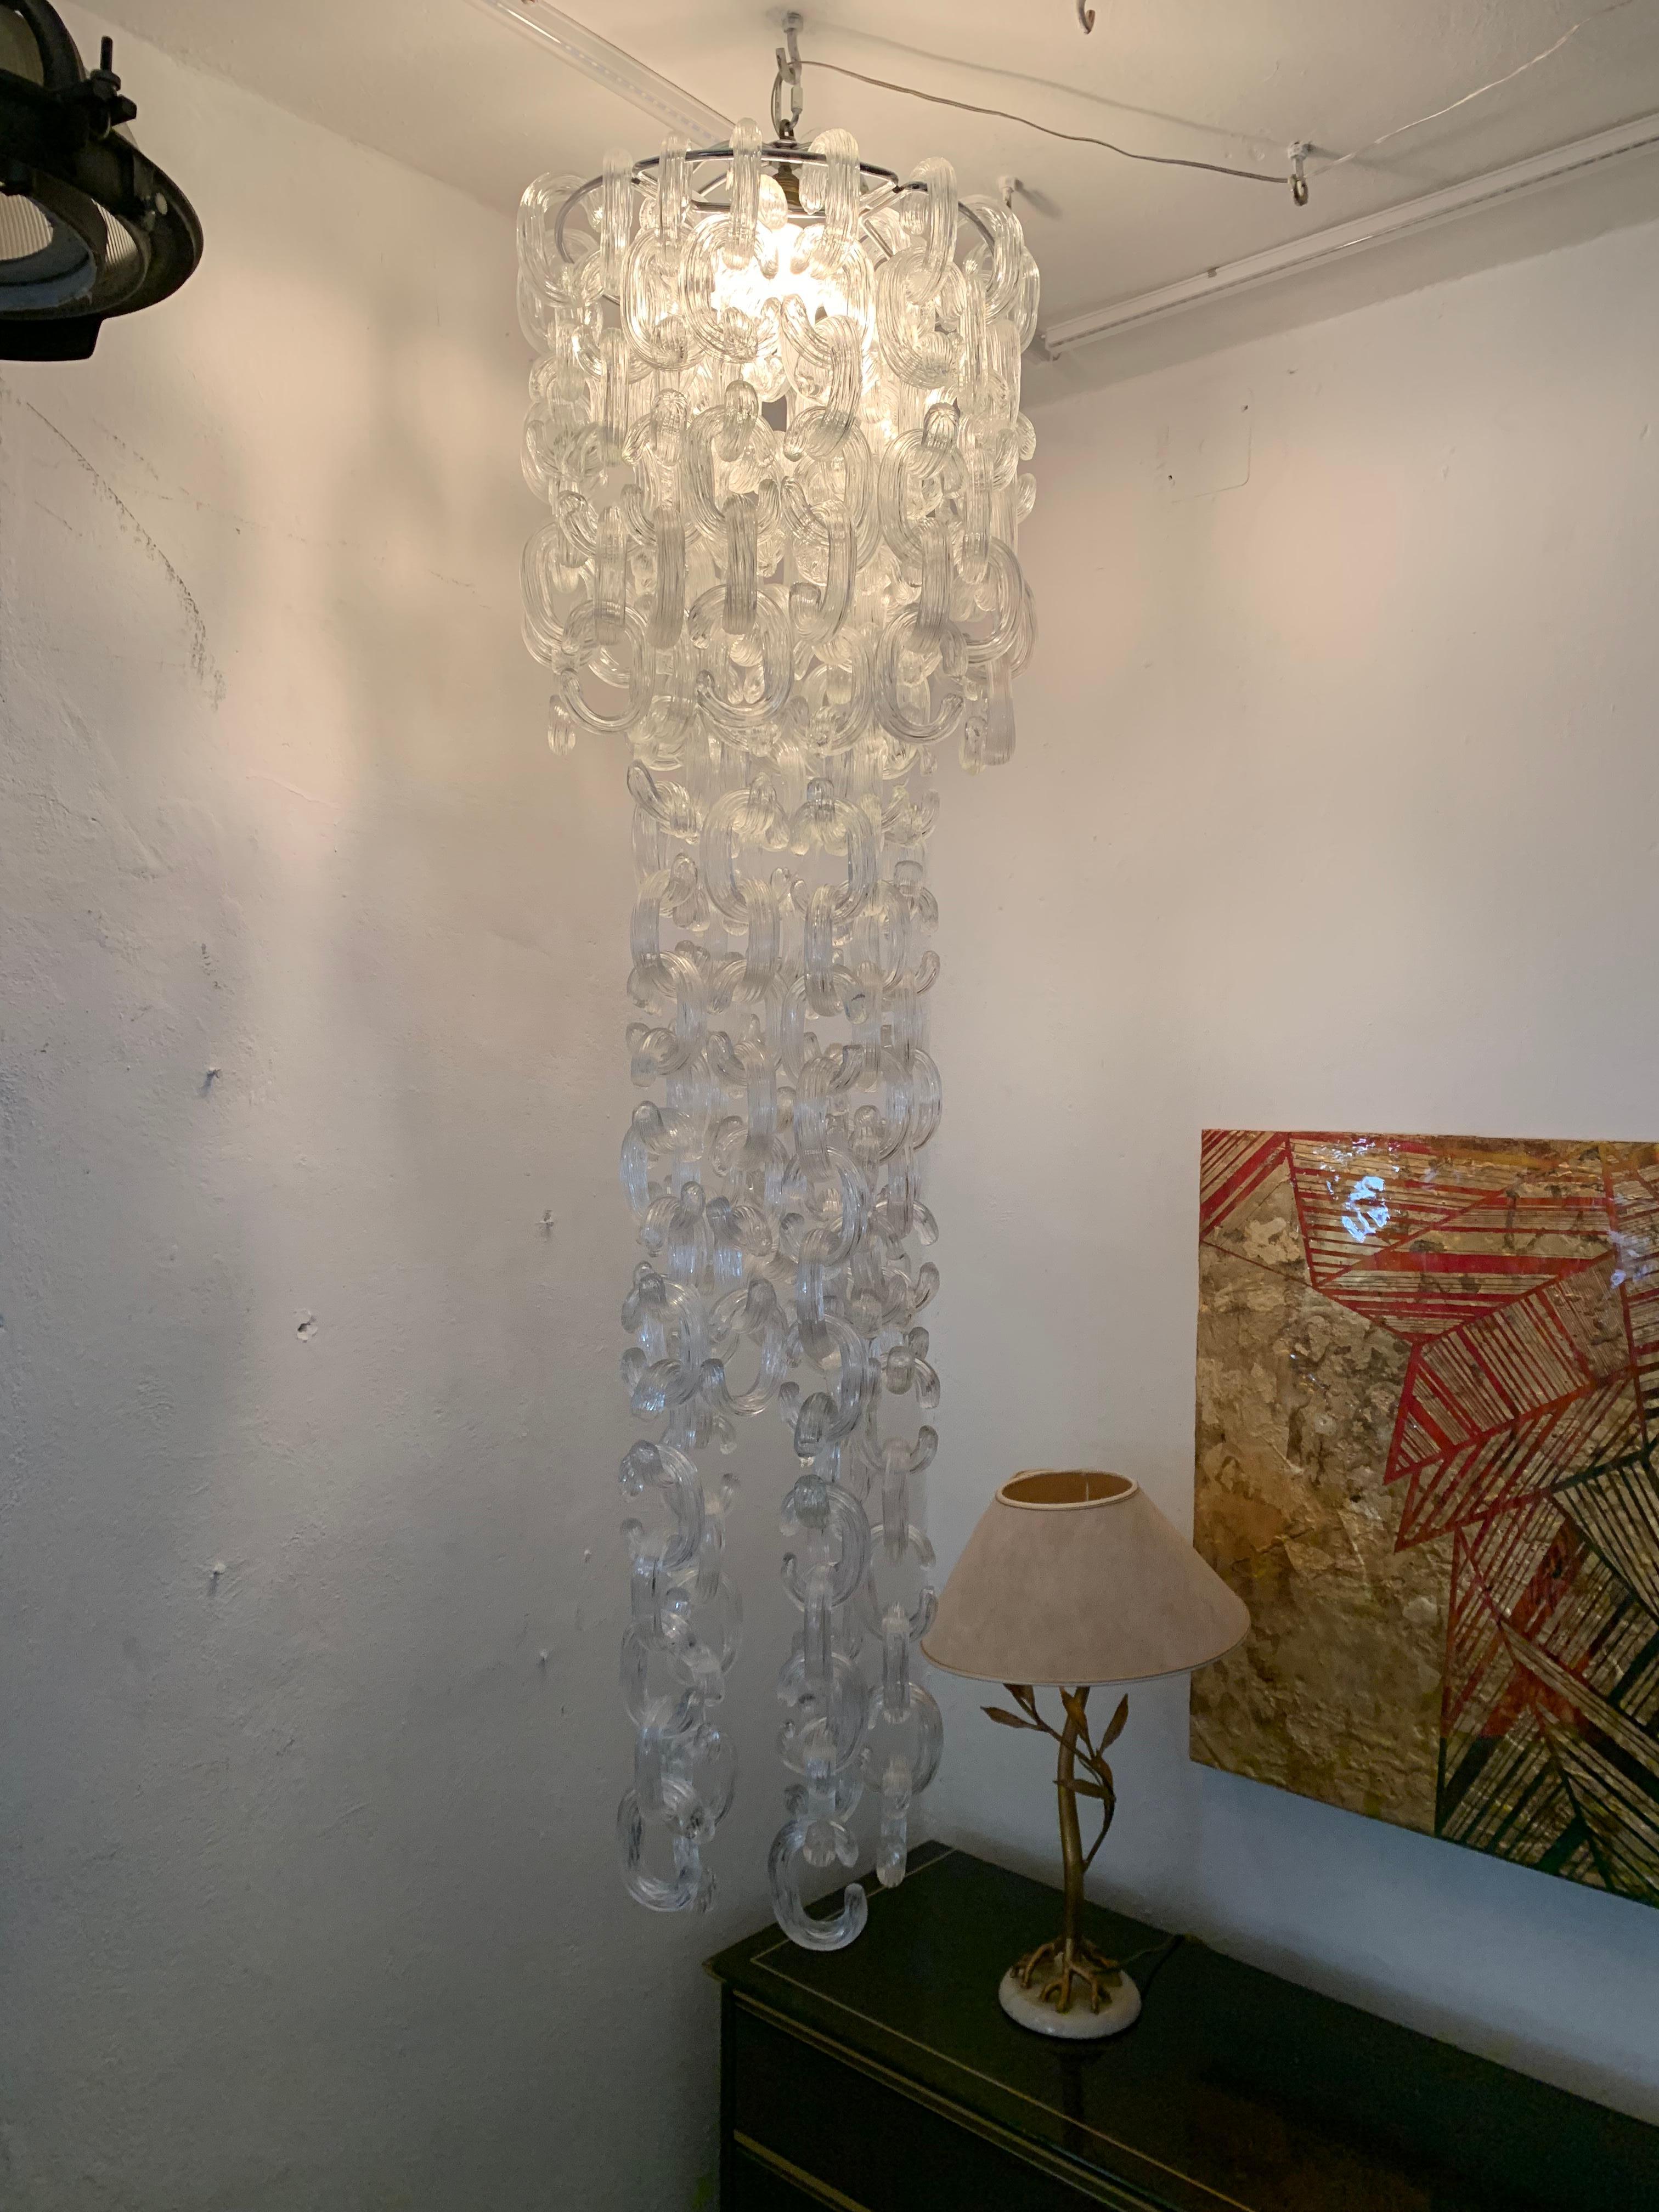 Italian Very Large Mid-Century Modern Chandelier by Fratelli Toso, Giusto Toso, 1968 For Sale